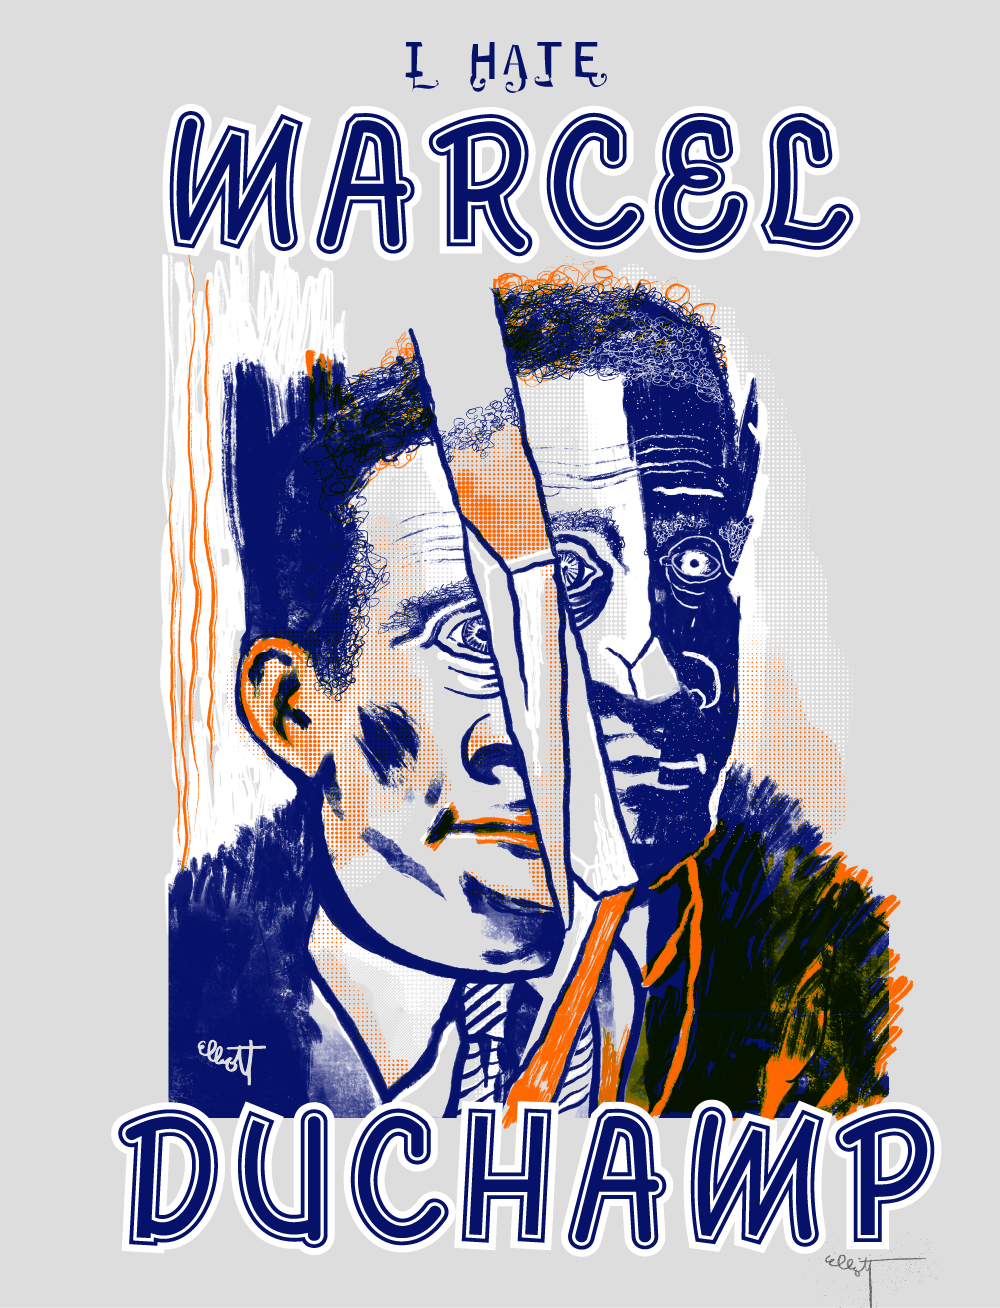 “I Hate Marcel Duchamp" By Elliott Earls 19.5" x 25.5" 3 Spot Colors Timed Edition (available for 24 hours only) Available from May, Friday, 2023 at 12:00PM to May, Friday, 2023 at 12:00PM to March 2, 2022 at 12:00 PM Canson Mi-Teintes 100% Cotton Paper Signed & numbered by the Artist Released May, 19, 2023 at 12:00PM Hand-Pulled Screenprint